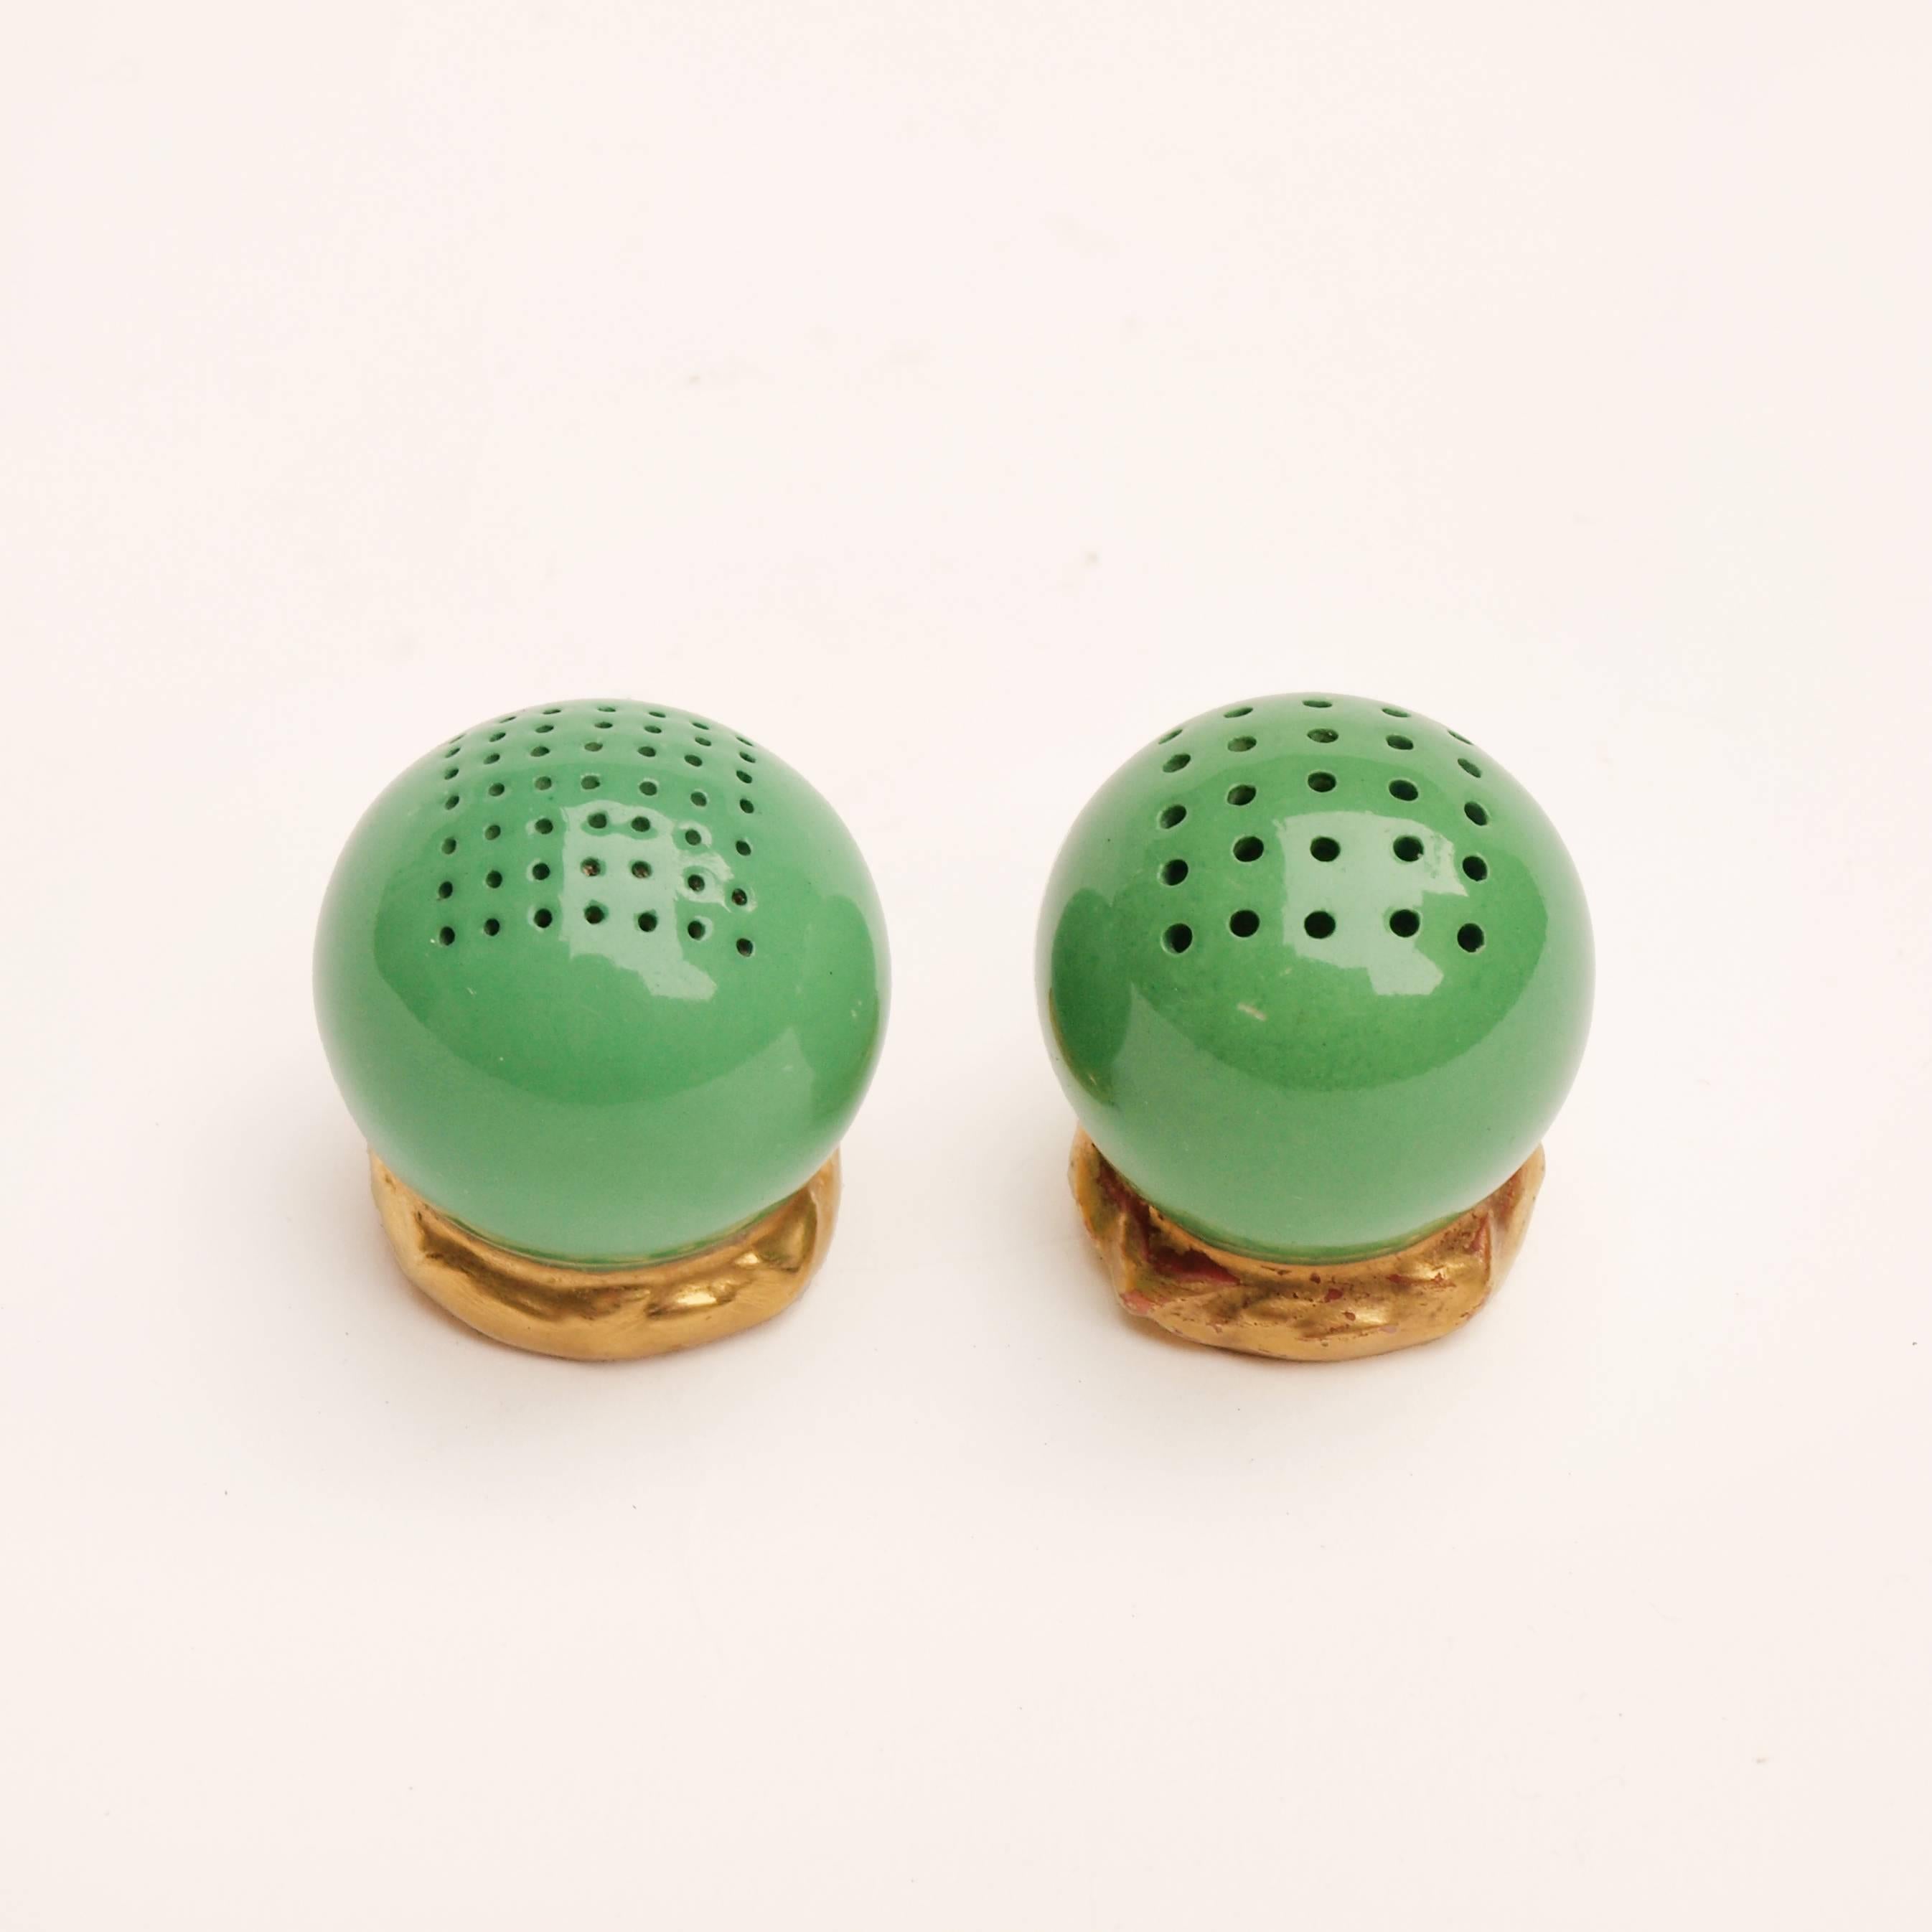 A pair of small spherical green ceramic and gold gilt salt and pepper shakers made by Royal Worcester. Signed and dated 1909 to their base.